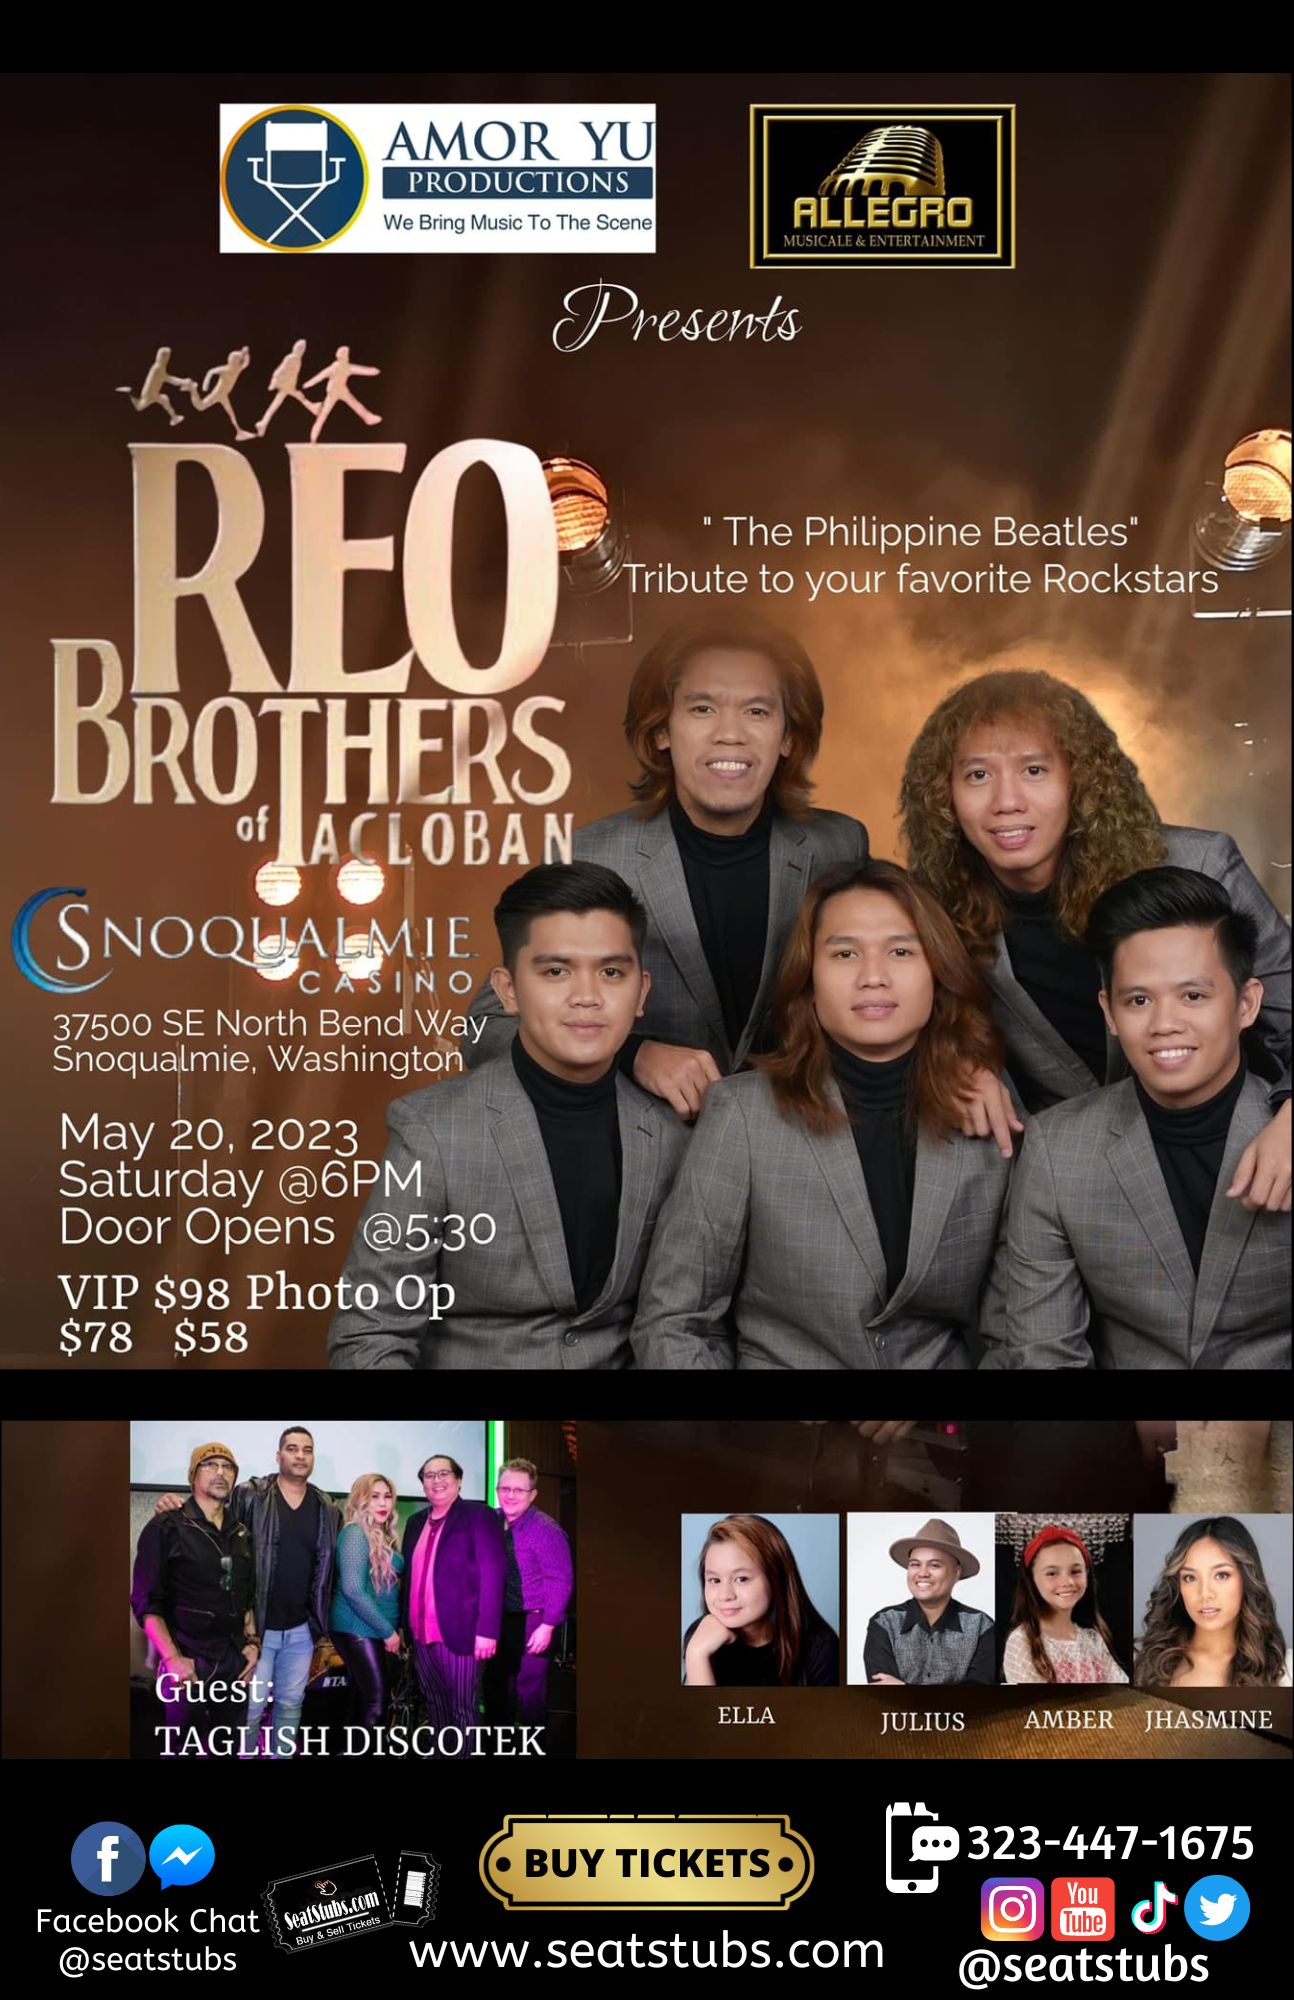 REO BROTHERS LIVE in Snoqualmie Casino Washington May 20, 2023 Buy Tickets (1)